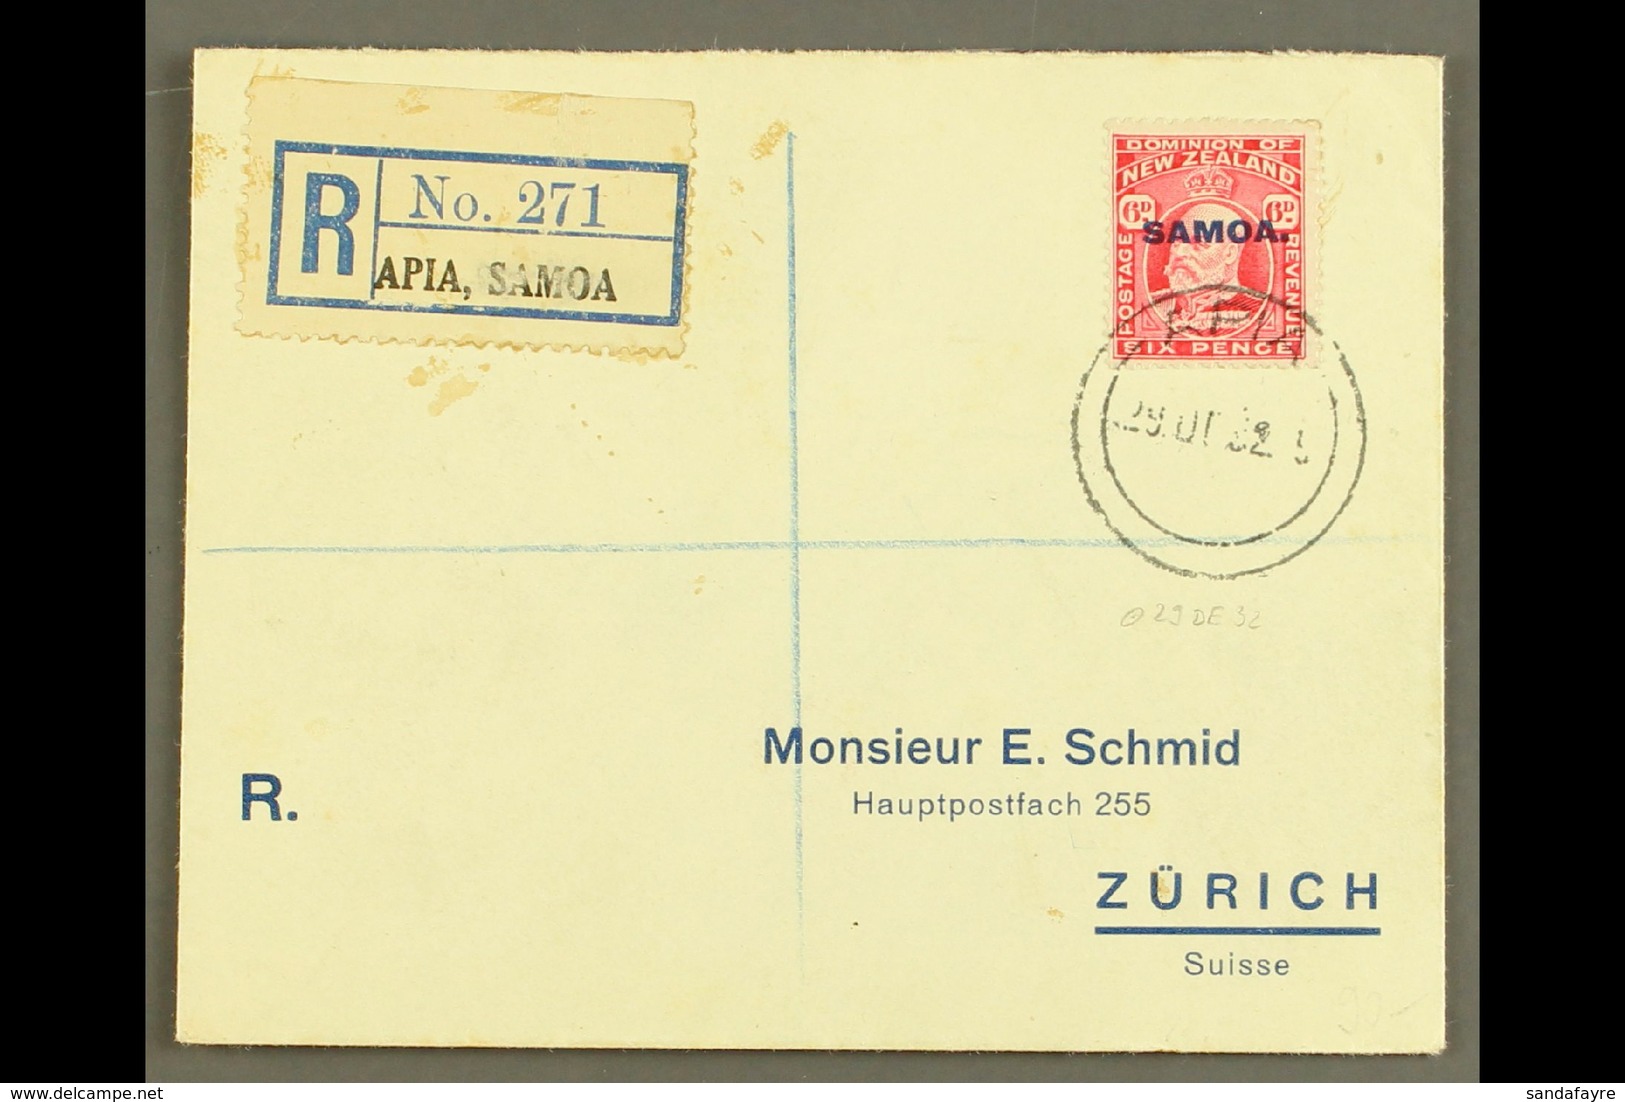 1932 6d Carmine, SG 119, Single Franking On Neat Printed, Registered Envelope To Switzerland, Tied By Apia 29.12.32 Post - Samoa (Staat)